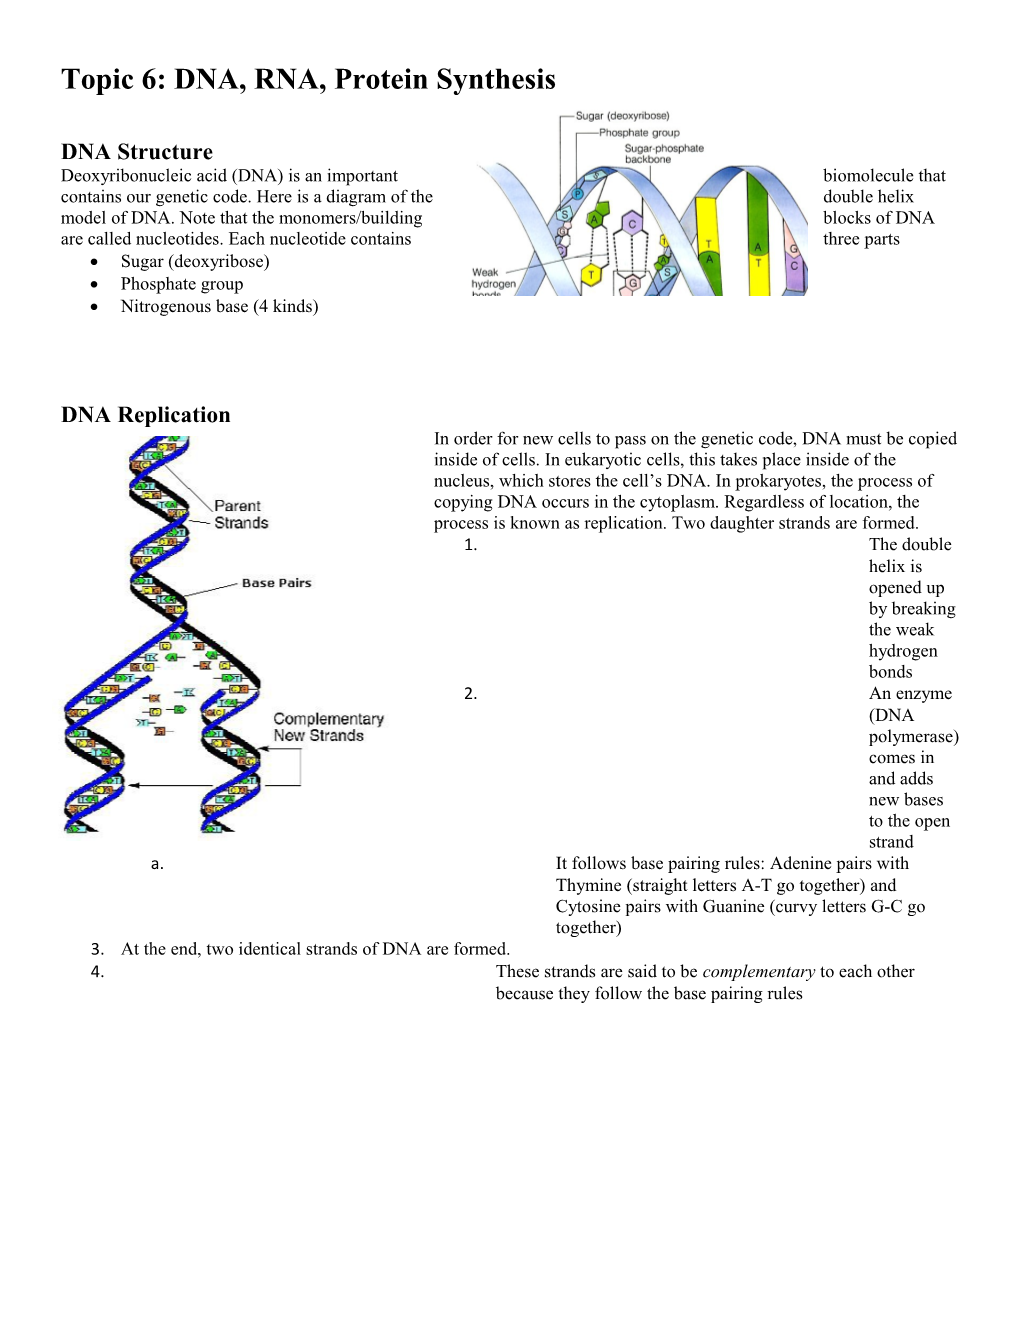 Topic 6: DNA, RNA, Protein Synthesis